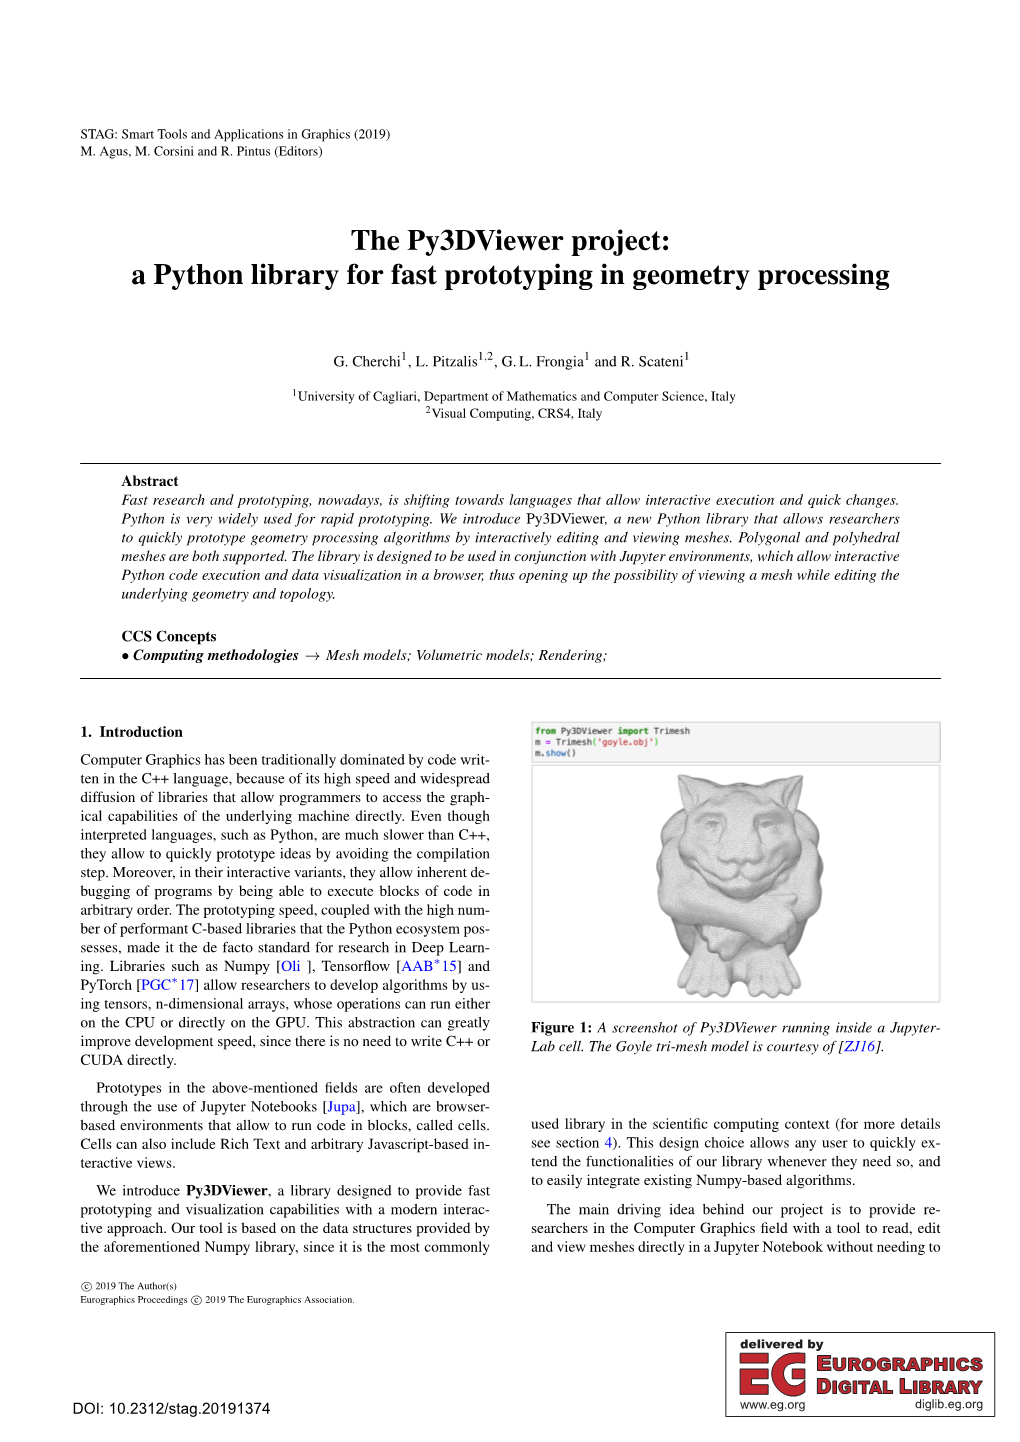 The Py3dviewer Project: a Python Library for Fast Prototyping in Geometry Processing